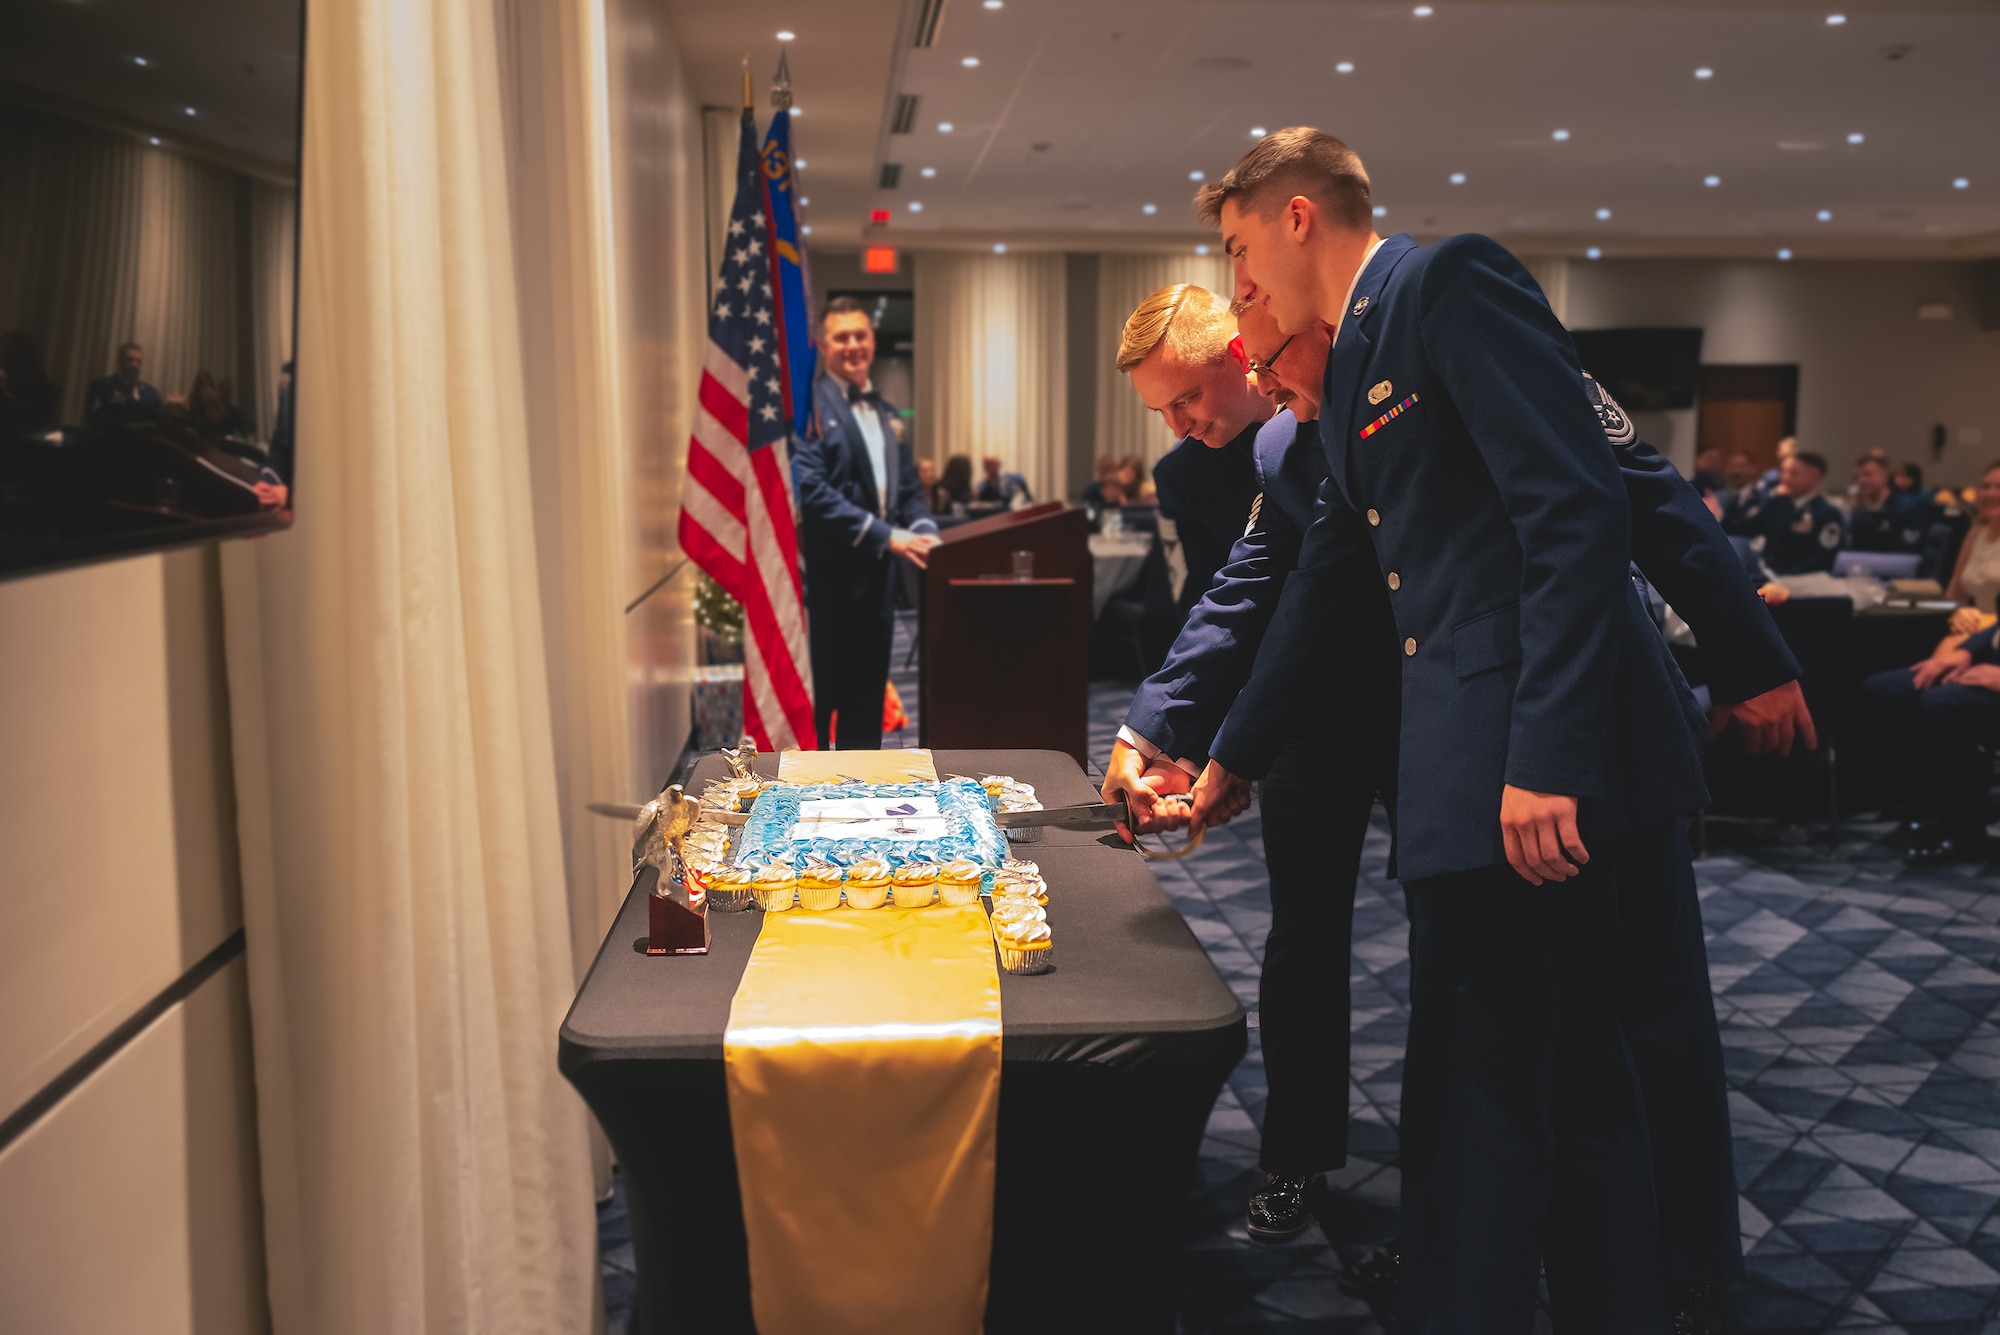 A group of Airmen perform a ceremonial cake-cutting with a saber during an awards banquet